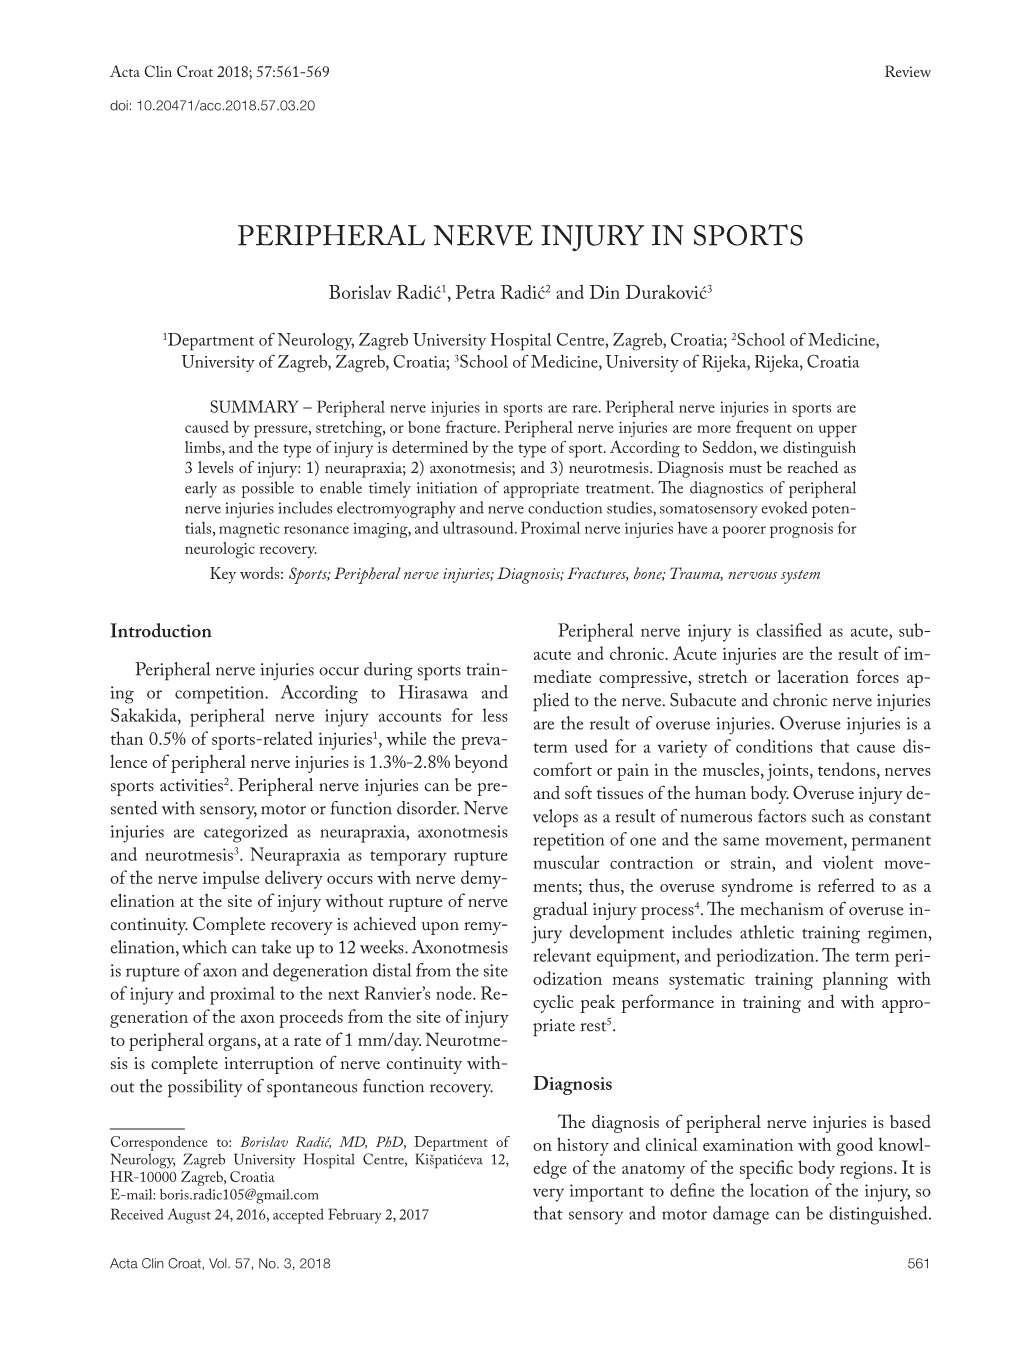 Peripheral Nerve Injury in Sports